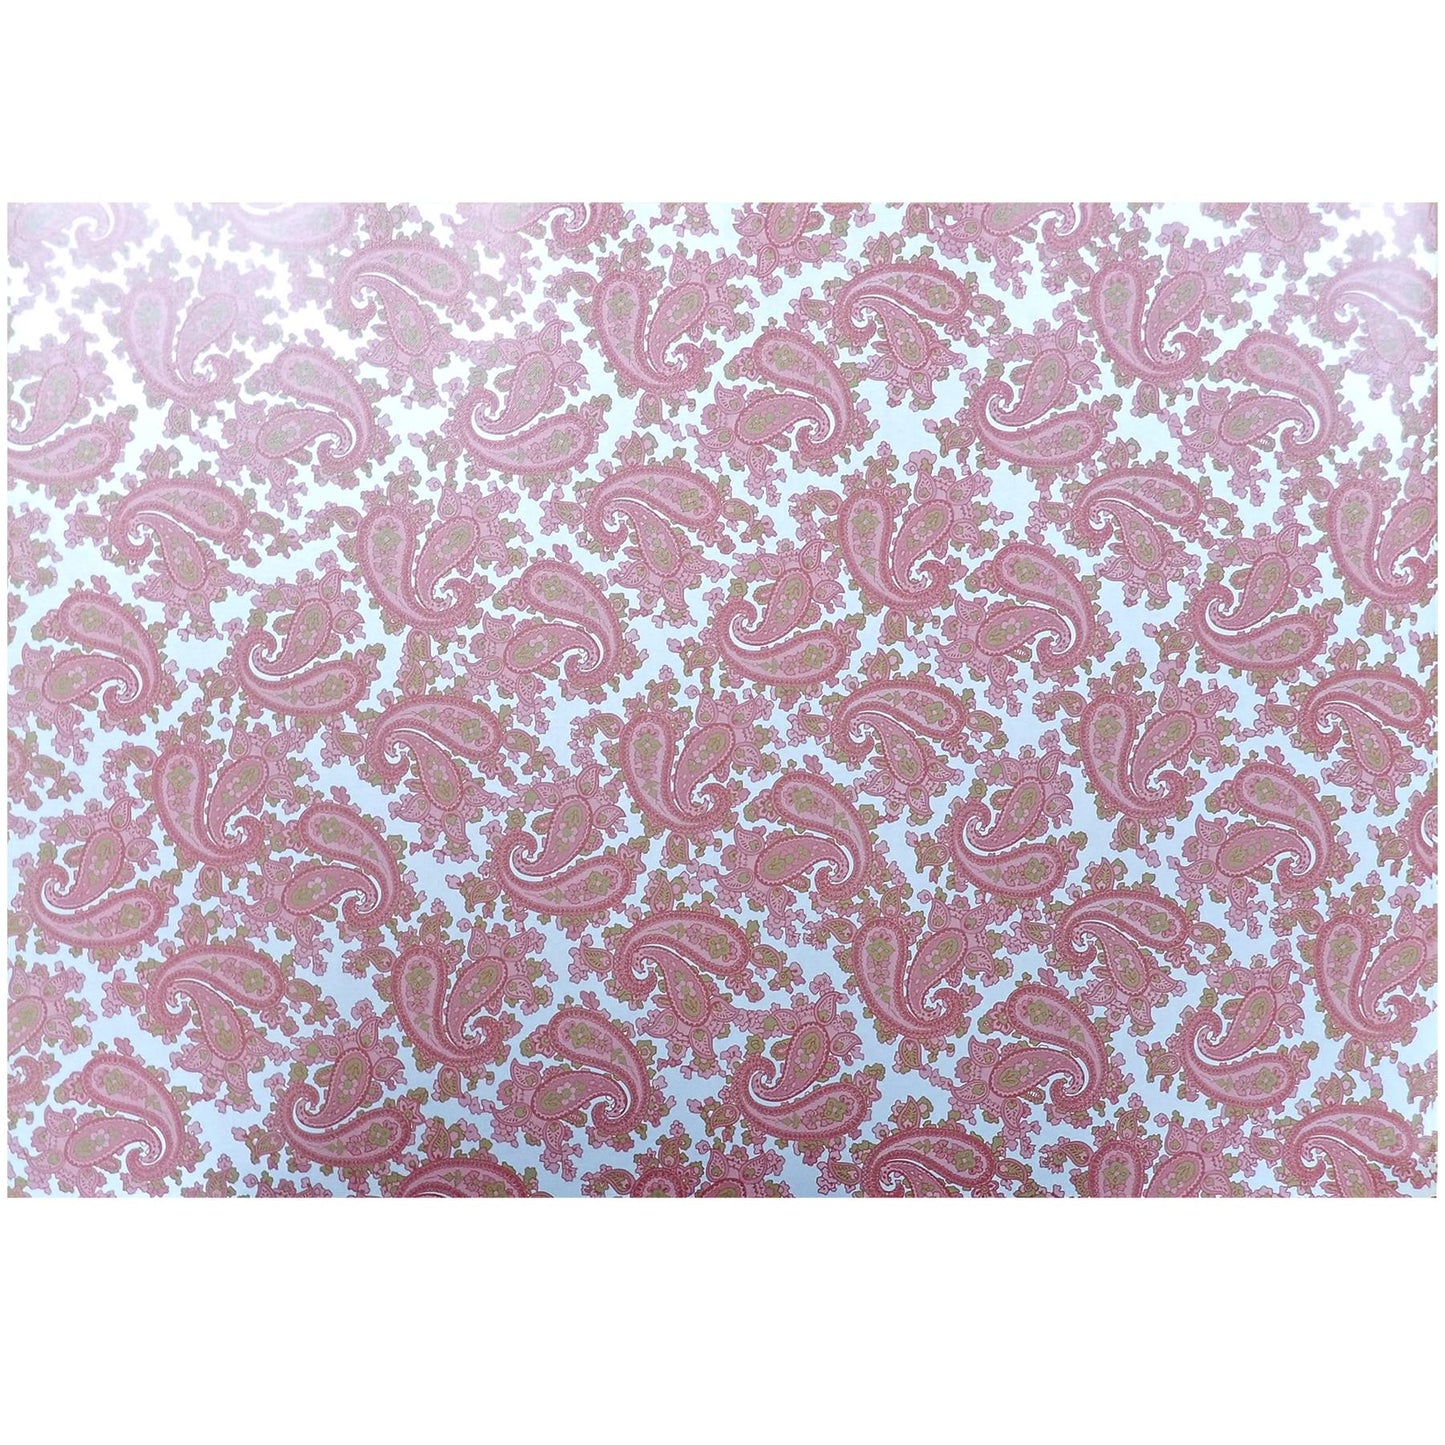 Luthitec Silver Backed Dark Pink Waffle Texture Paisley Paper Guitar Body Decal - 690x480mm